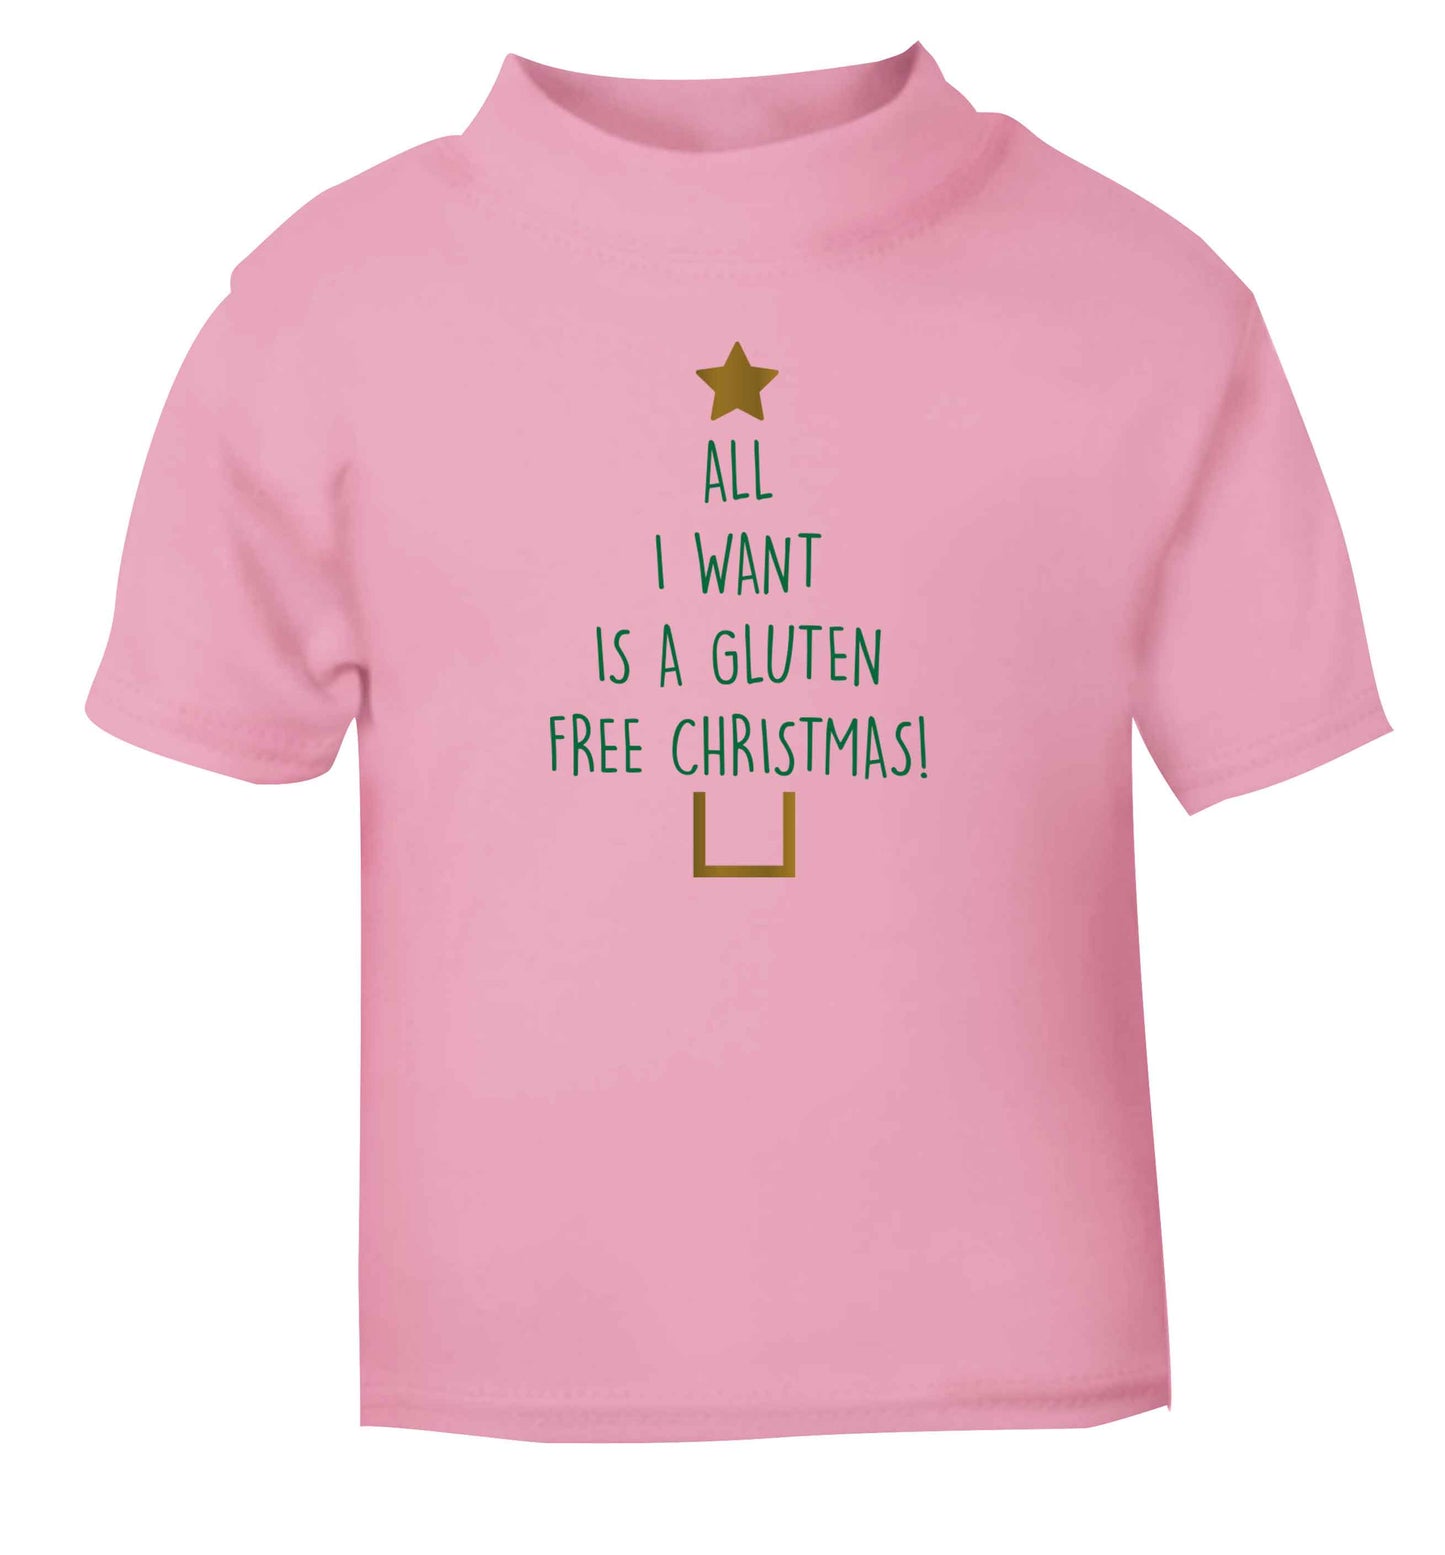 All I want is a gluten free Christmas light pink Baby Toddler Tshirt 2 Years